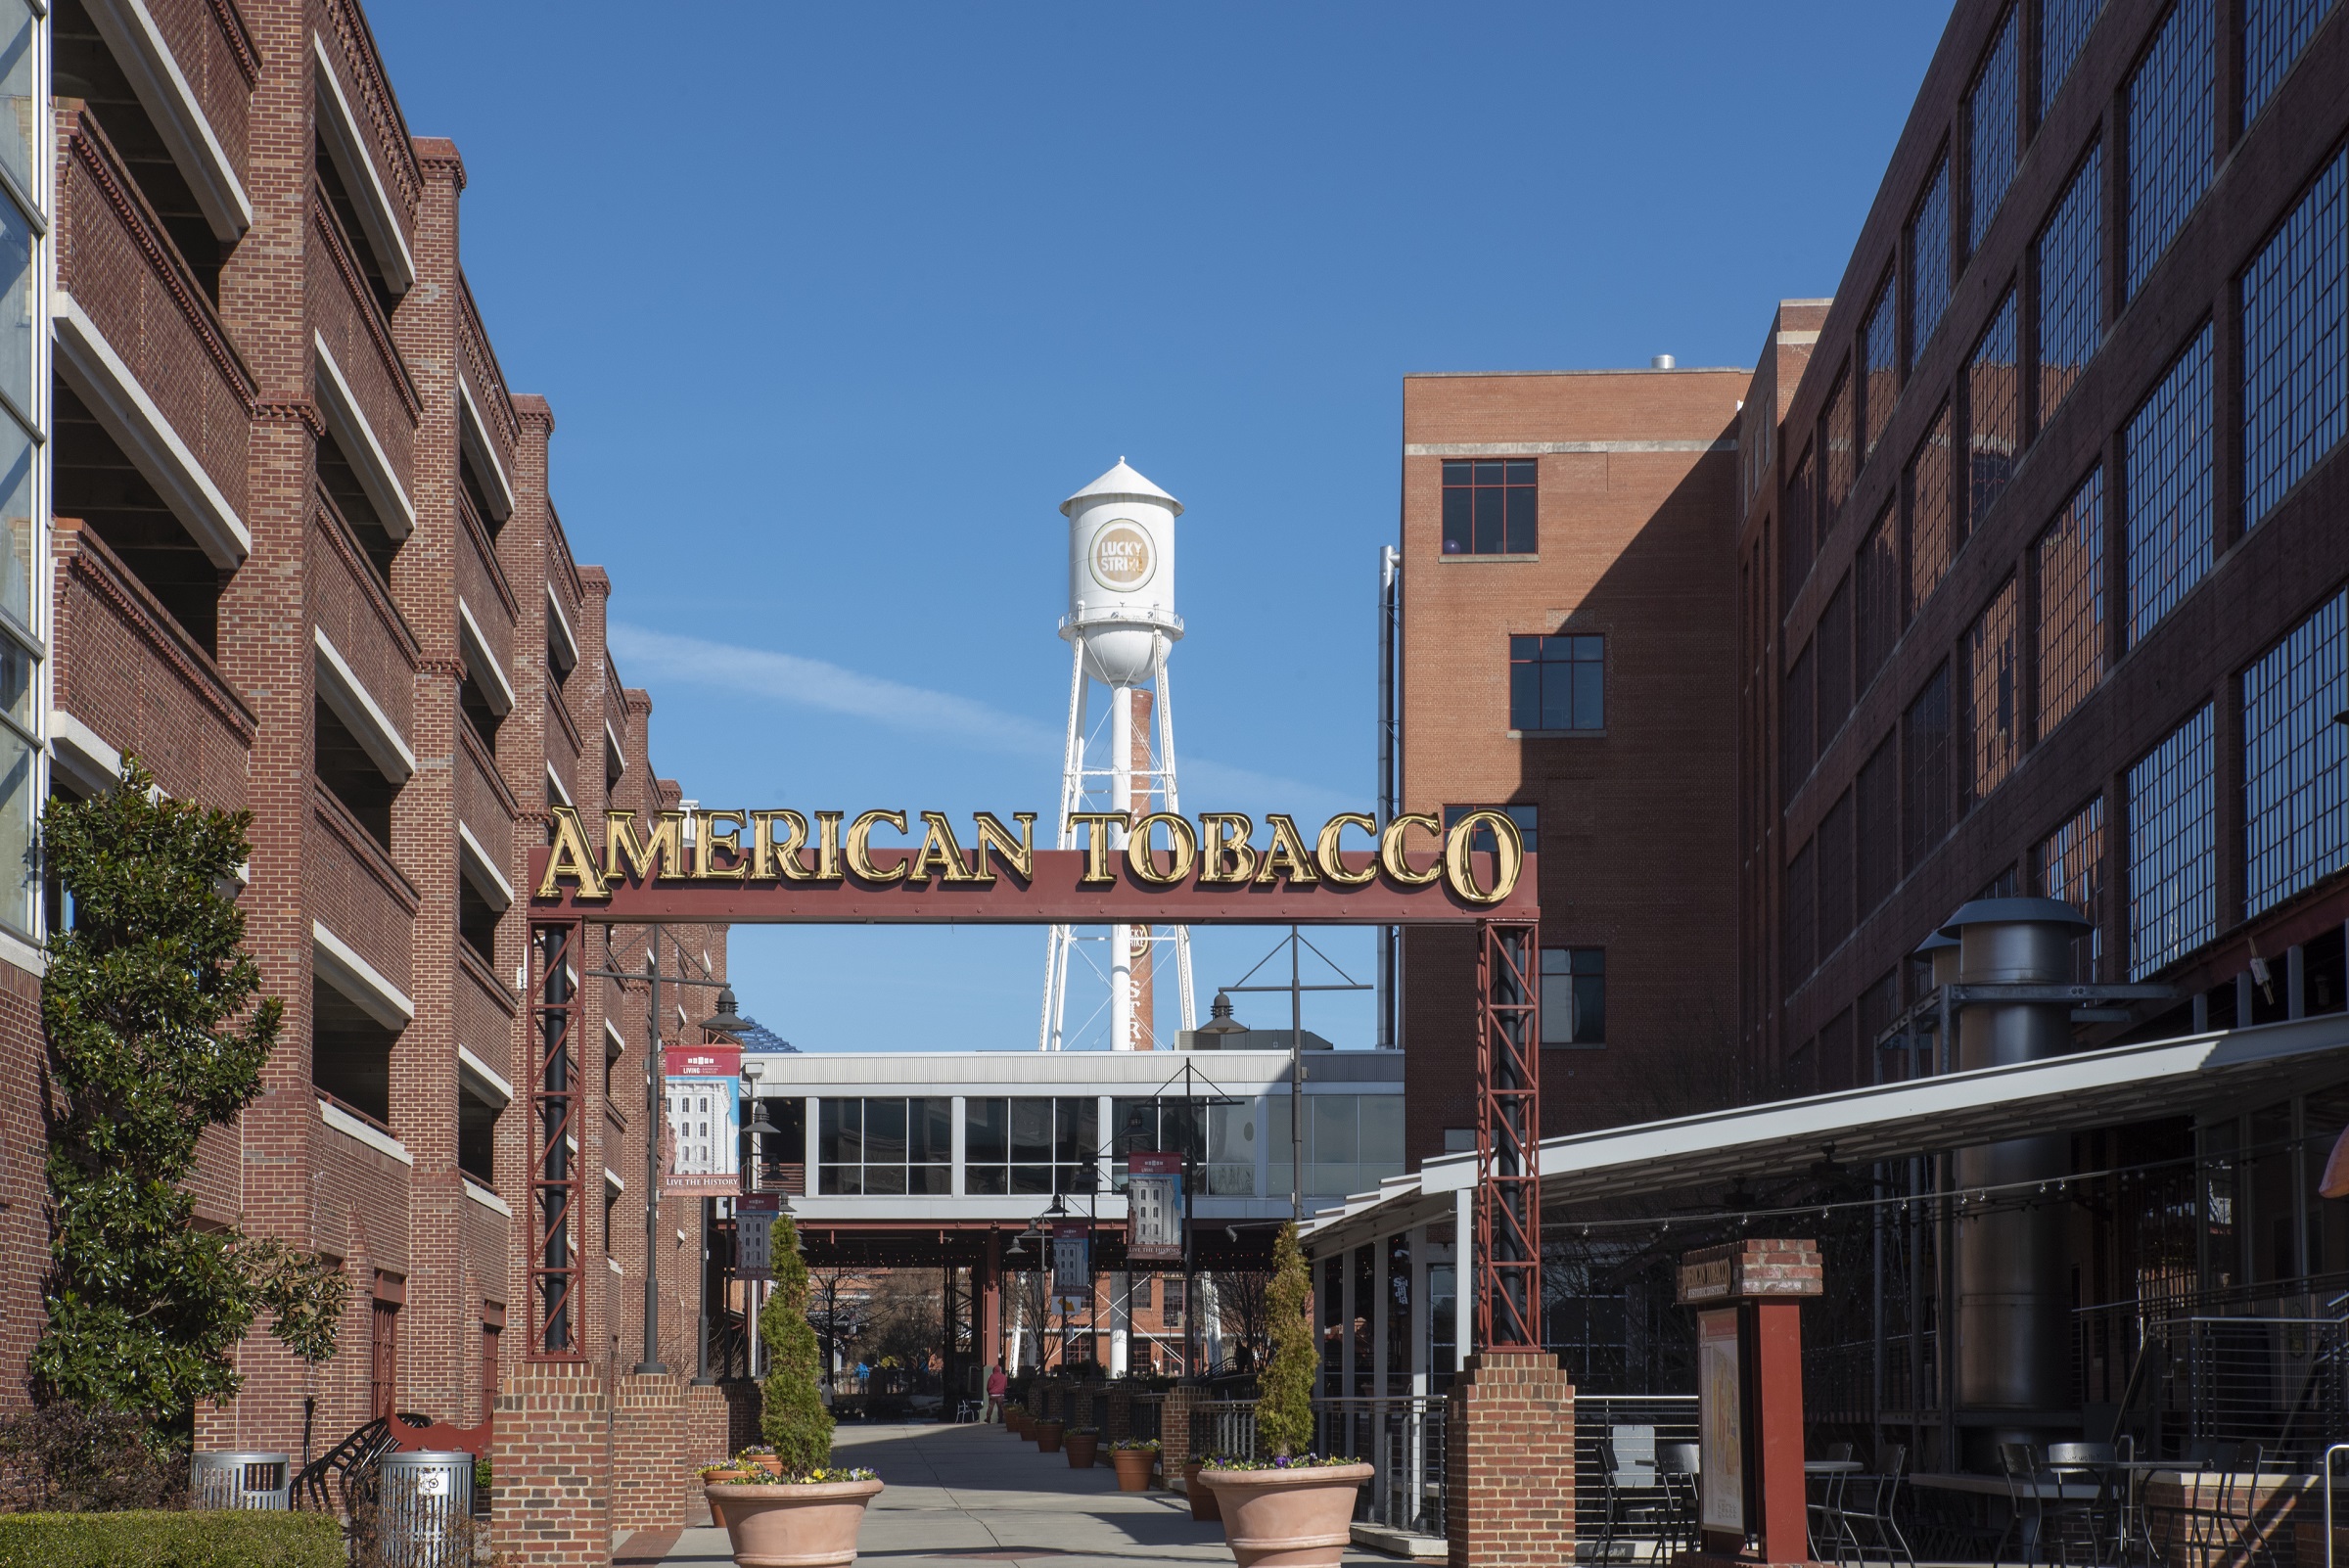 American Tobacco Shopping and Restaurant District